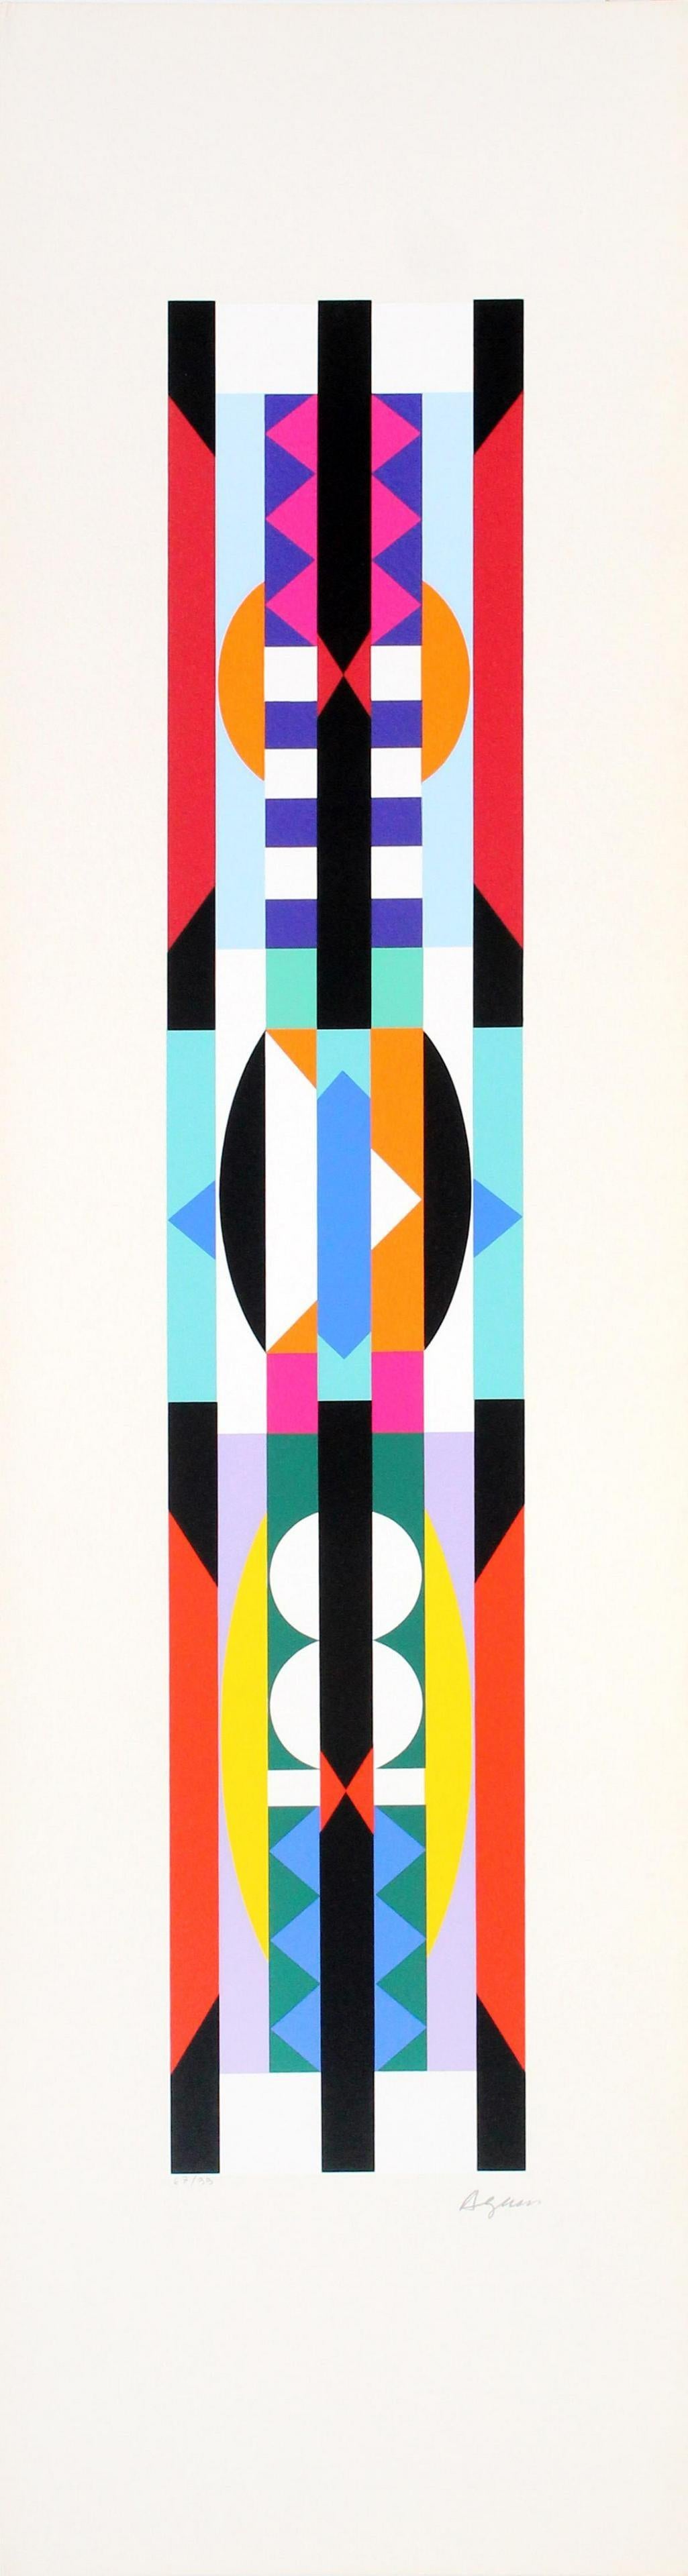 YAACOV AGAM  UNTITLED 7 FROM THE +-X9 SUITE  SIGNED AND NUMBERED - Print by Yaacov Agam